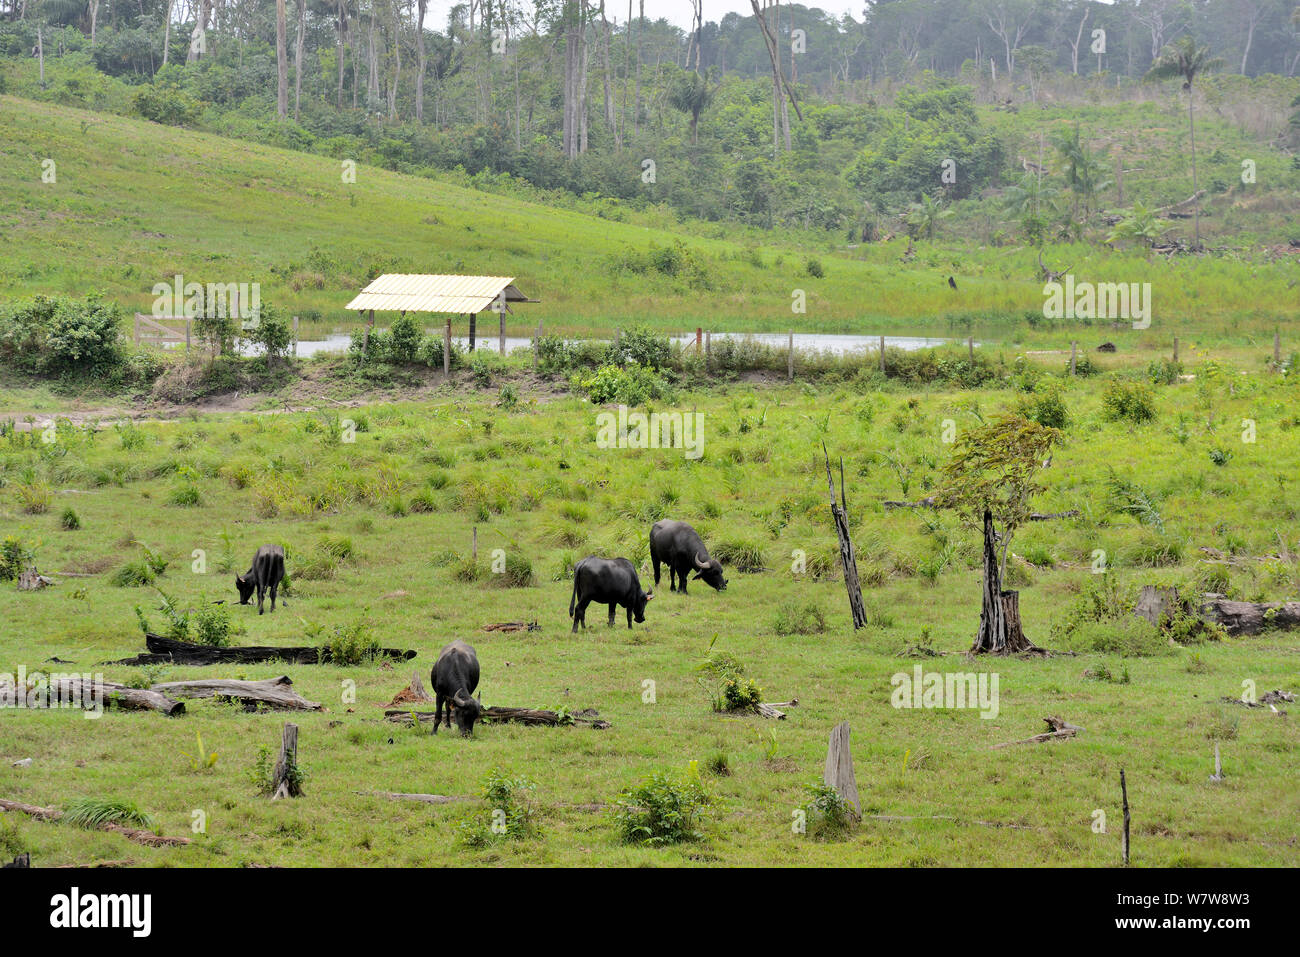 Domestic water buffalo (Bubalus bubalis) introduced species grazing in area deforested of primary rainforest, French Guiana. Stock Photo